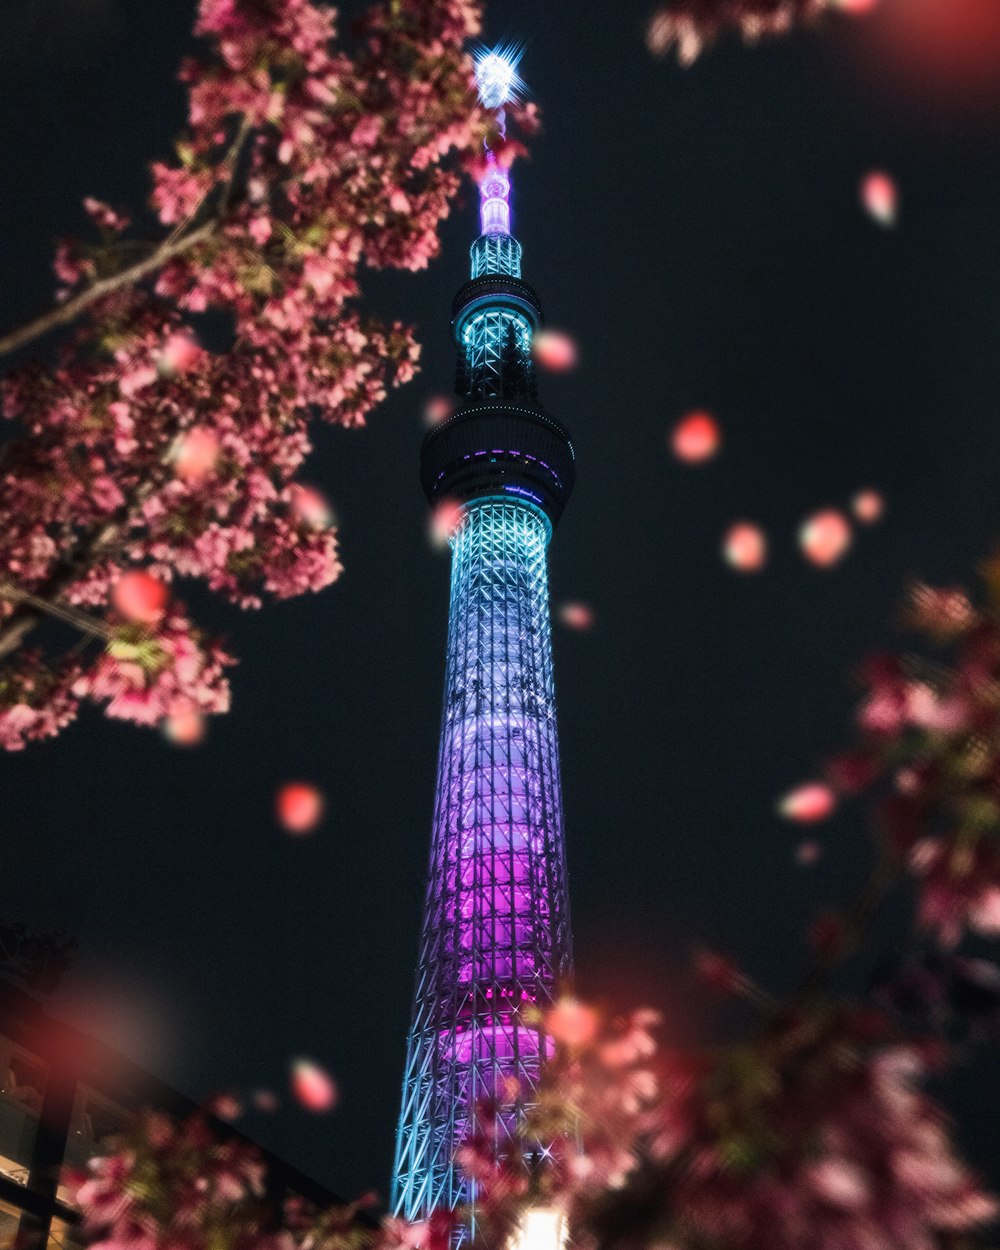 the tokyo tower is lit up at night